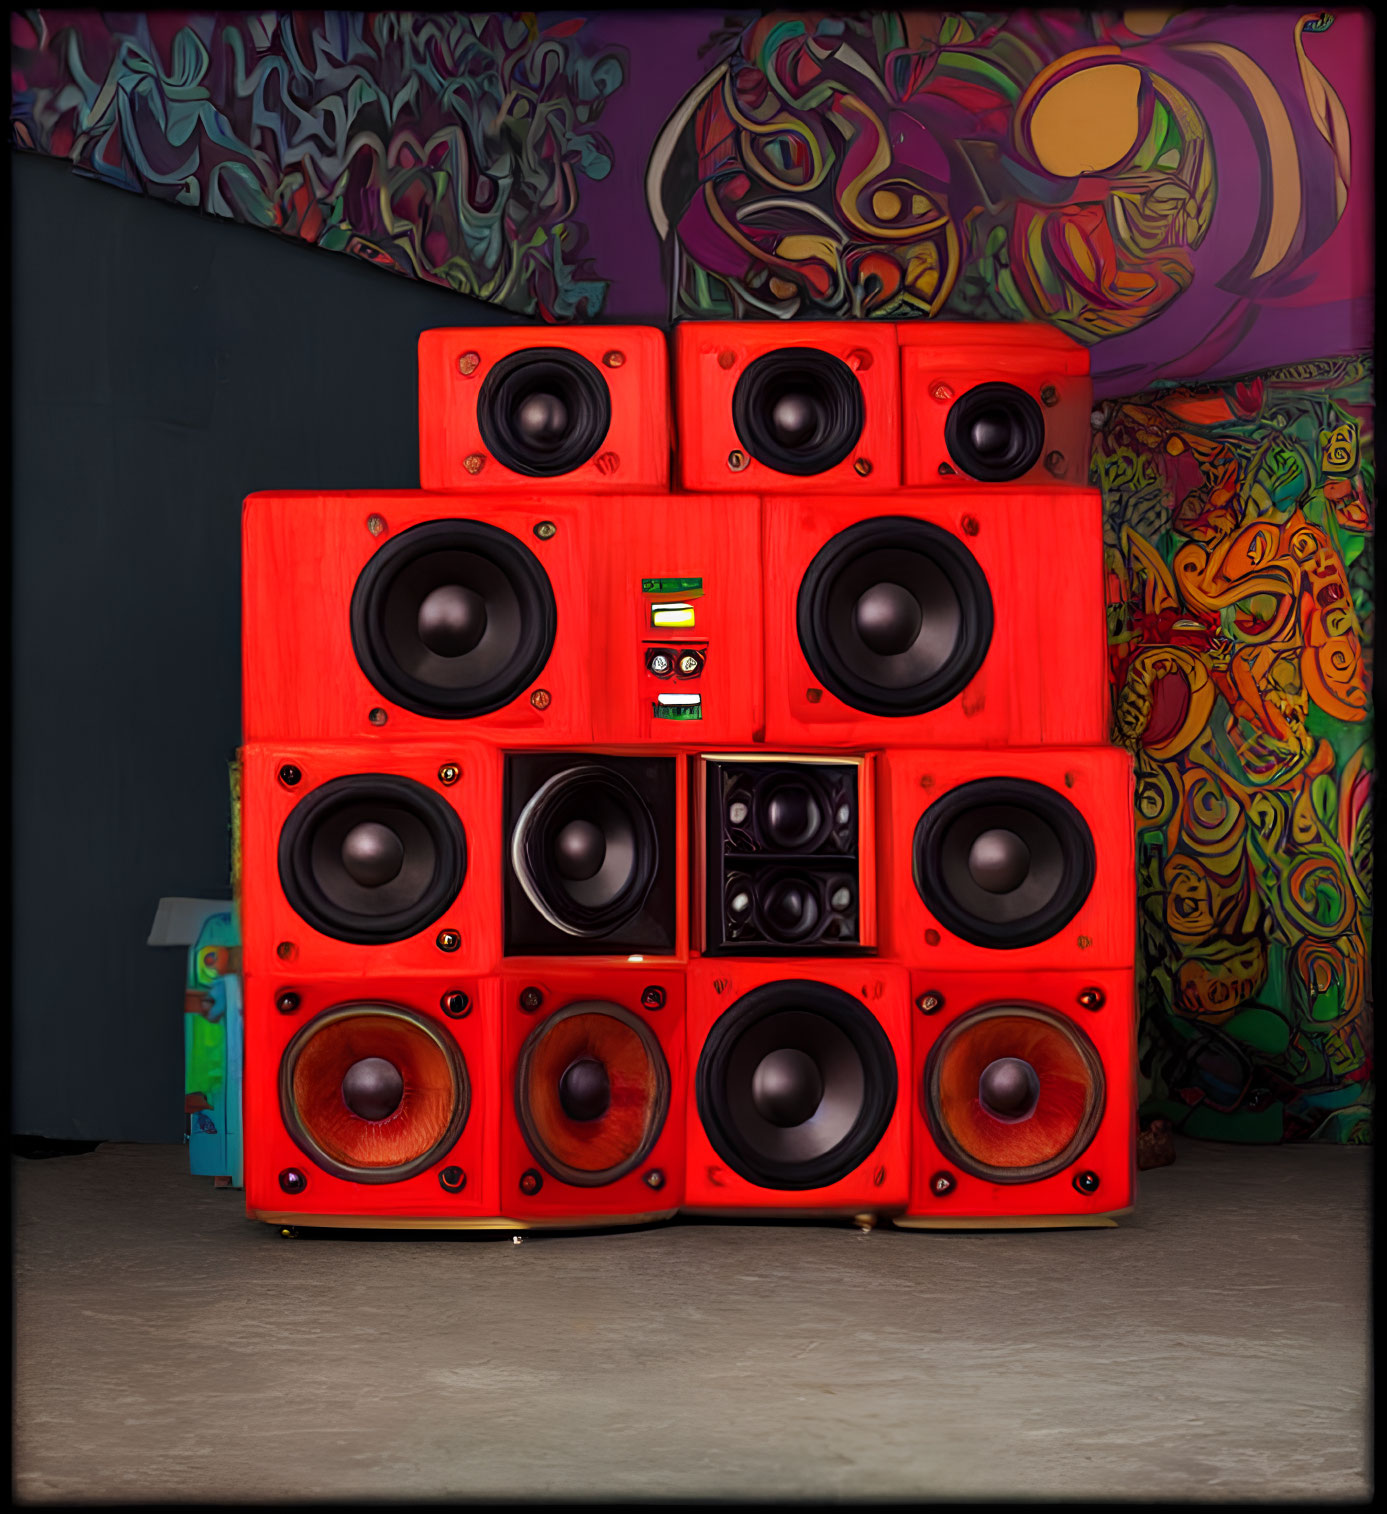 Vibrant graffiti art room with stack of red speakers